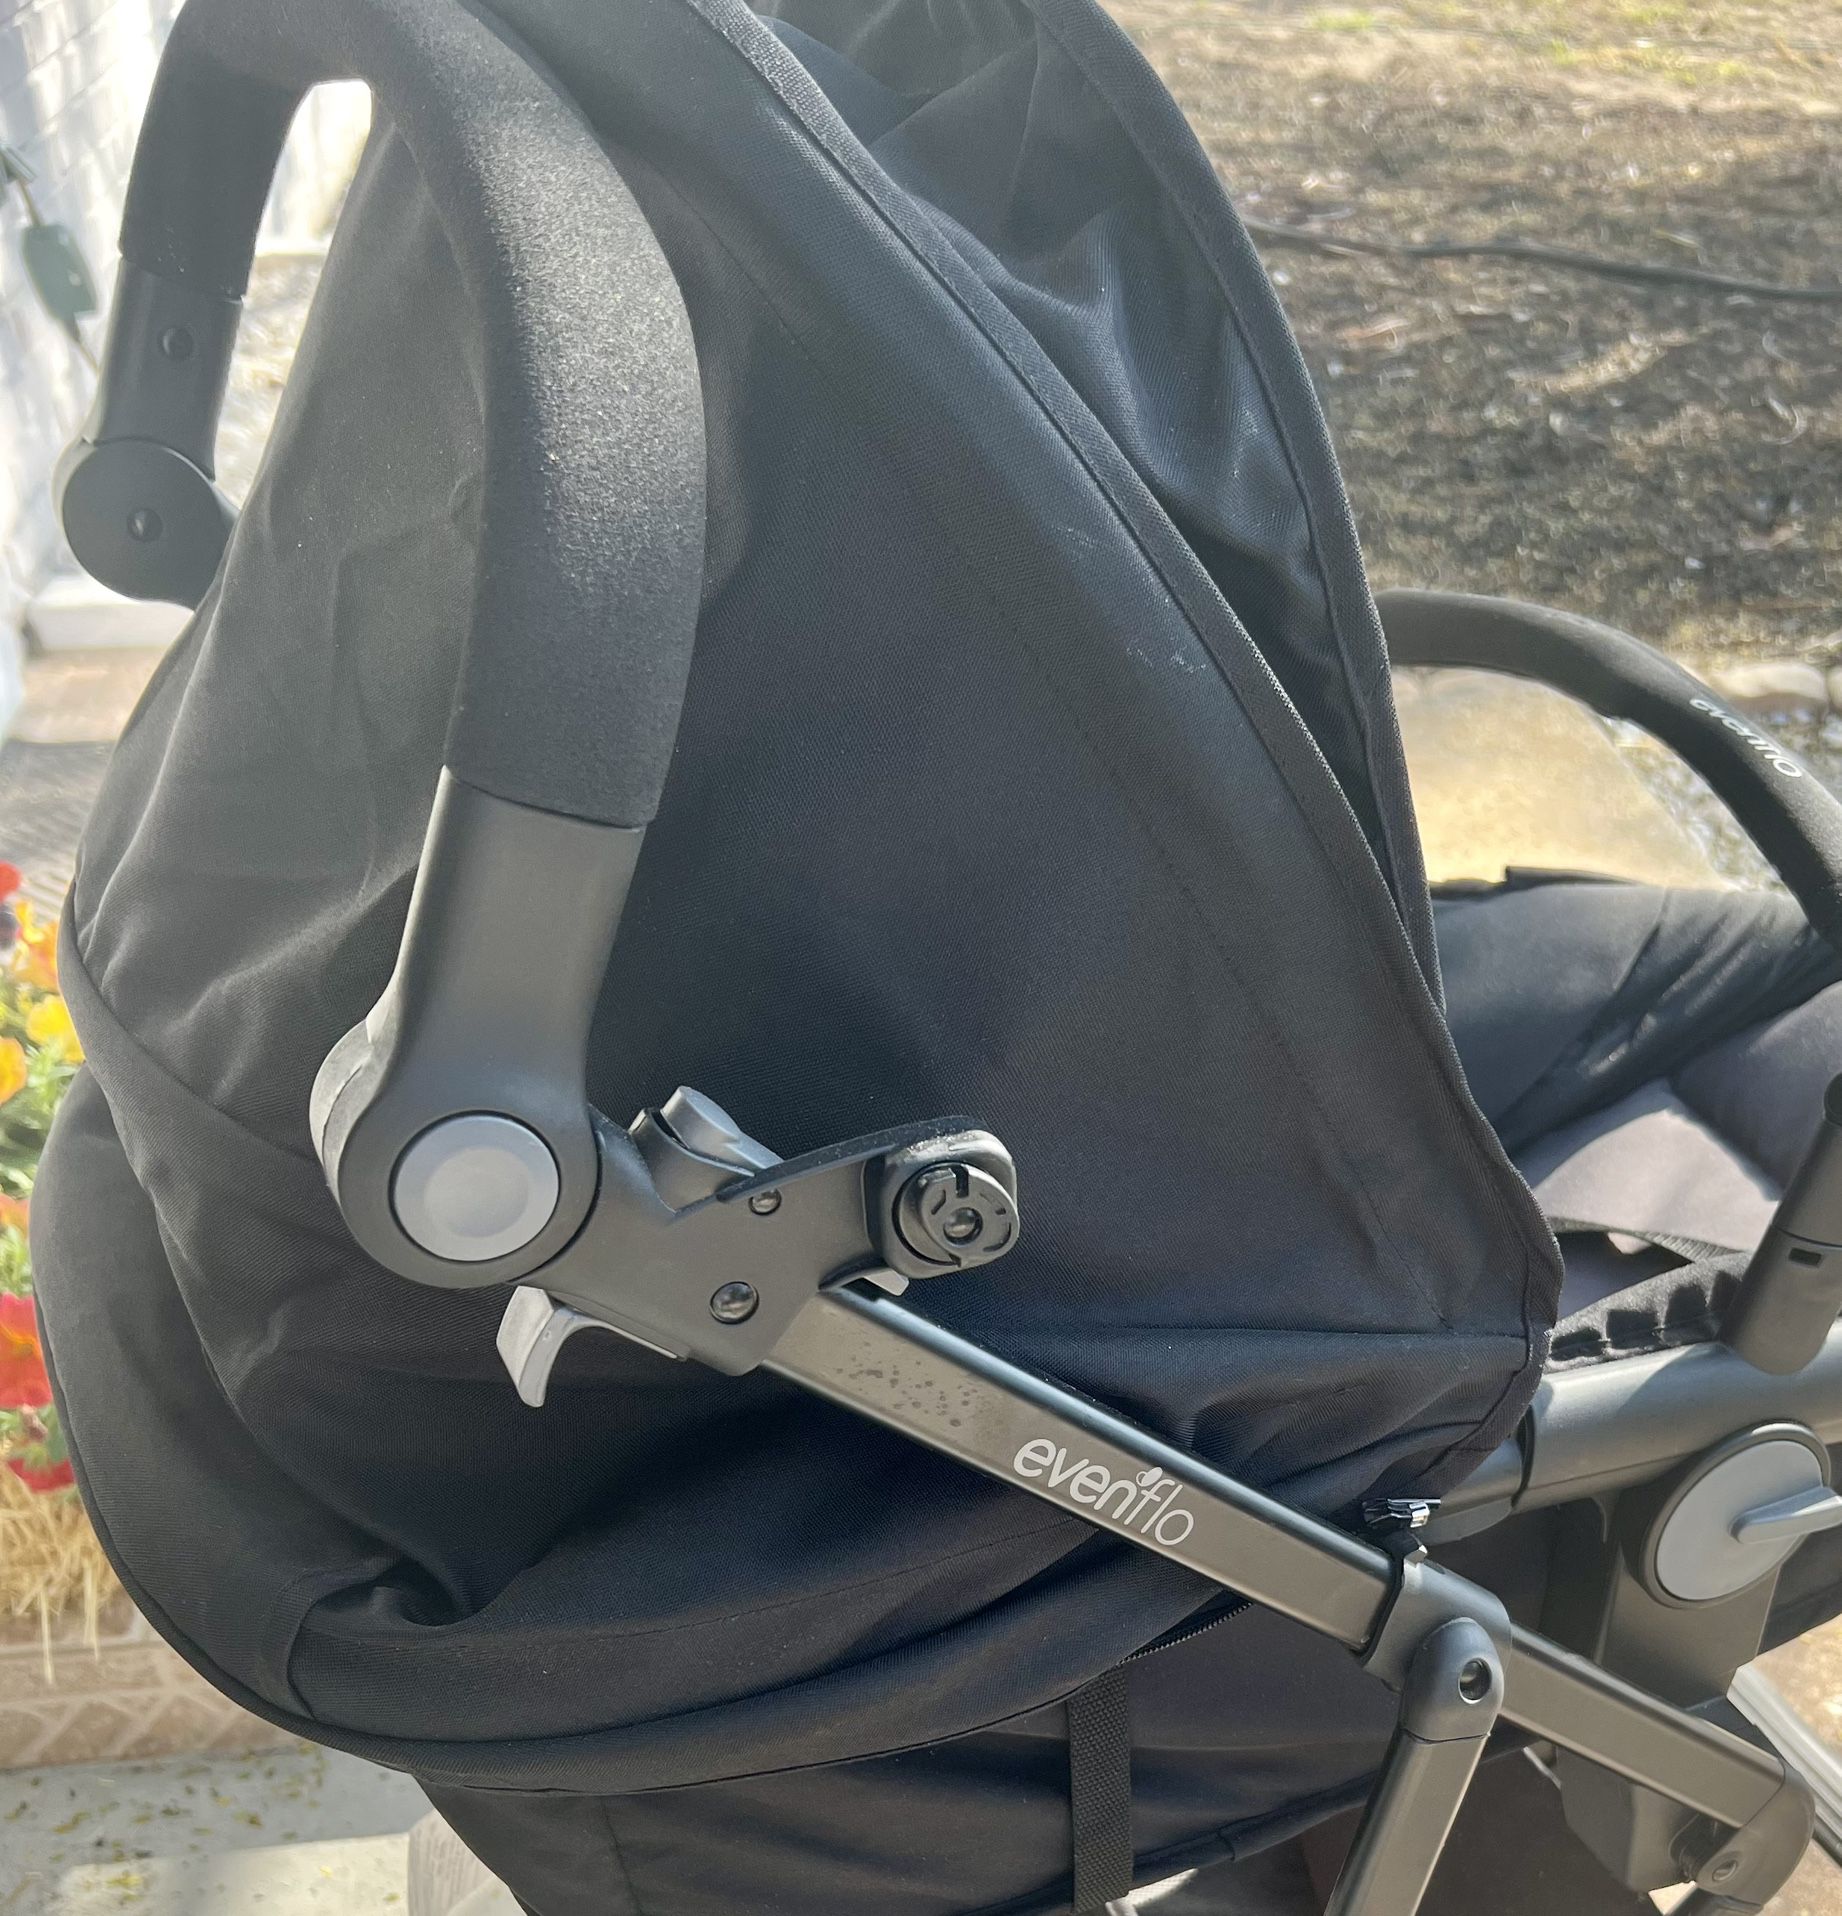 Even Flo Baby Stroller + Carriers All In 1